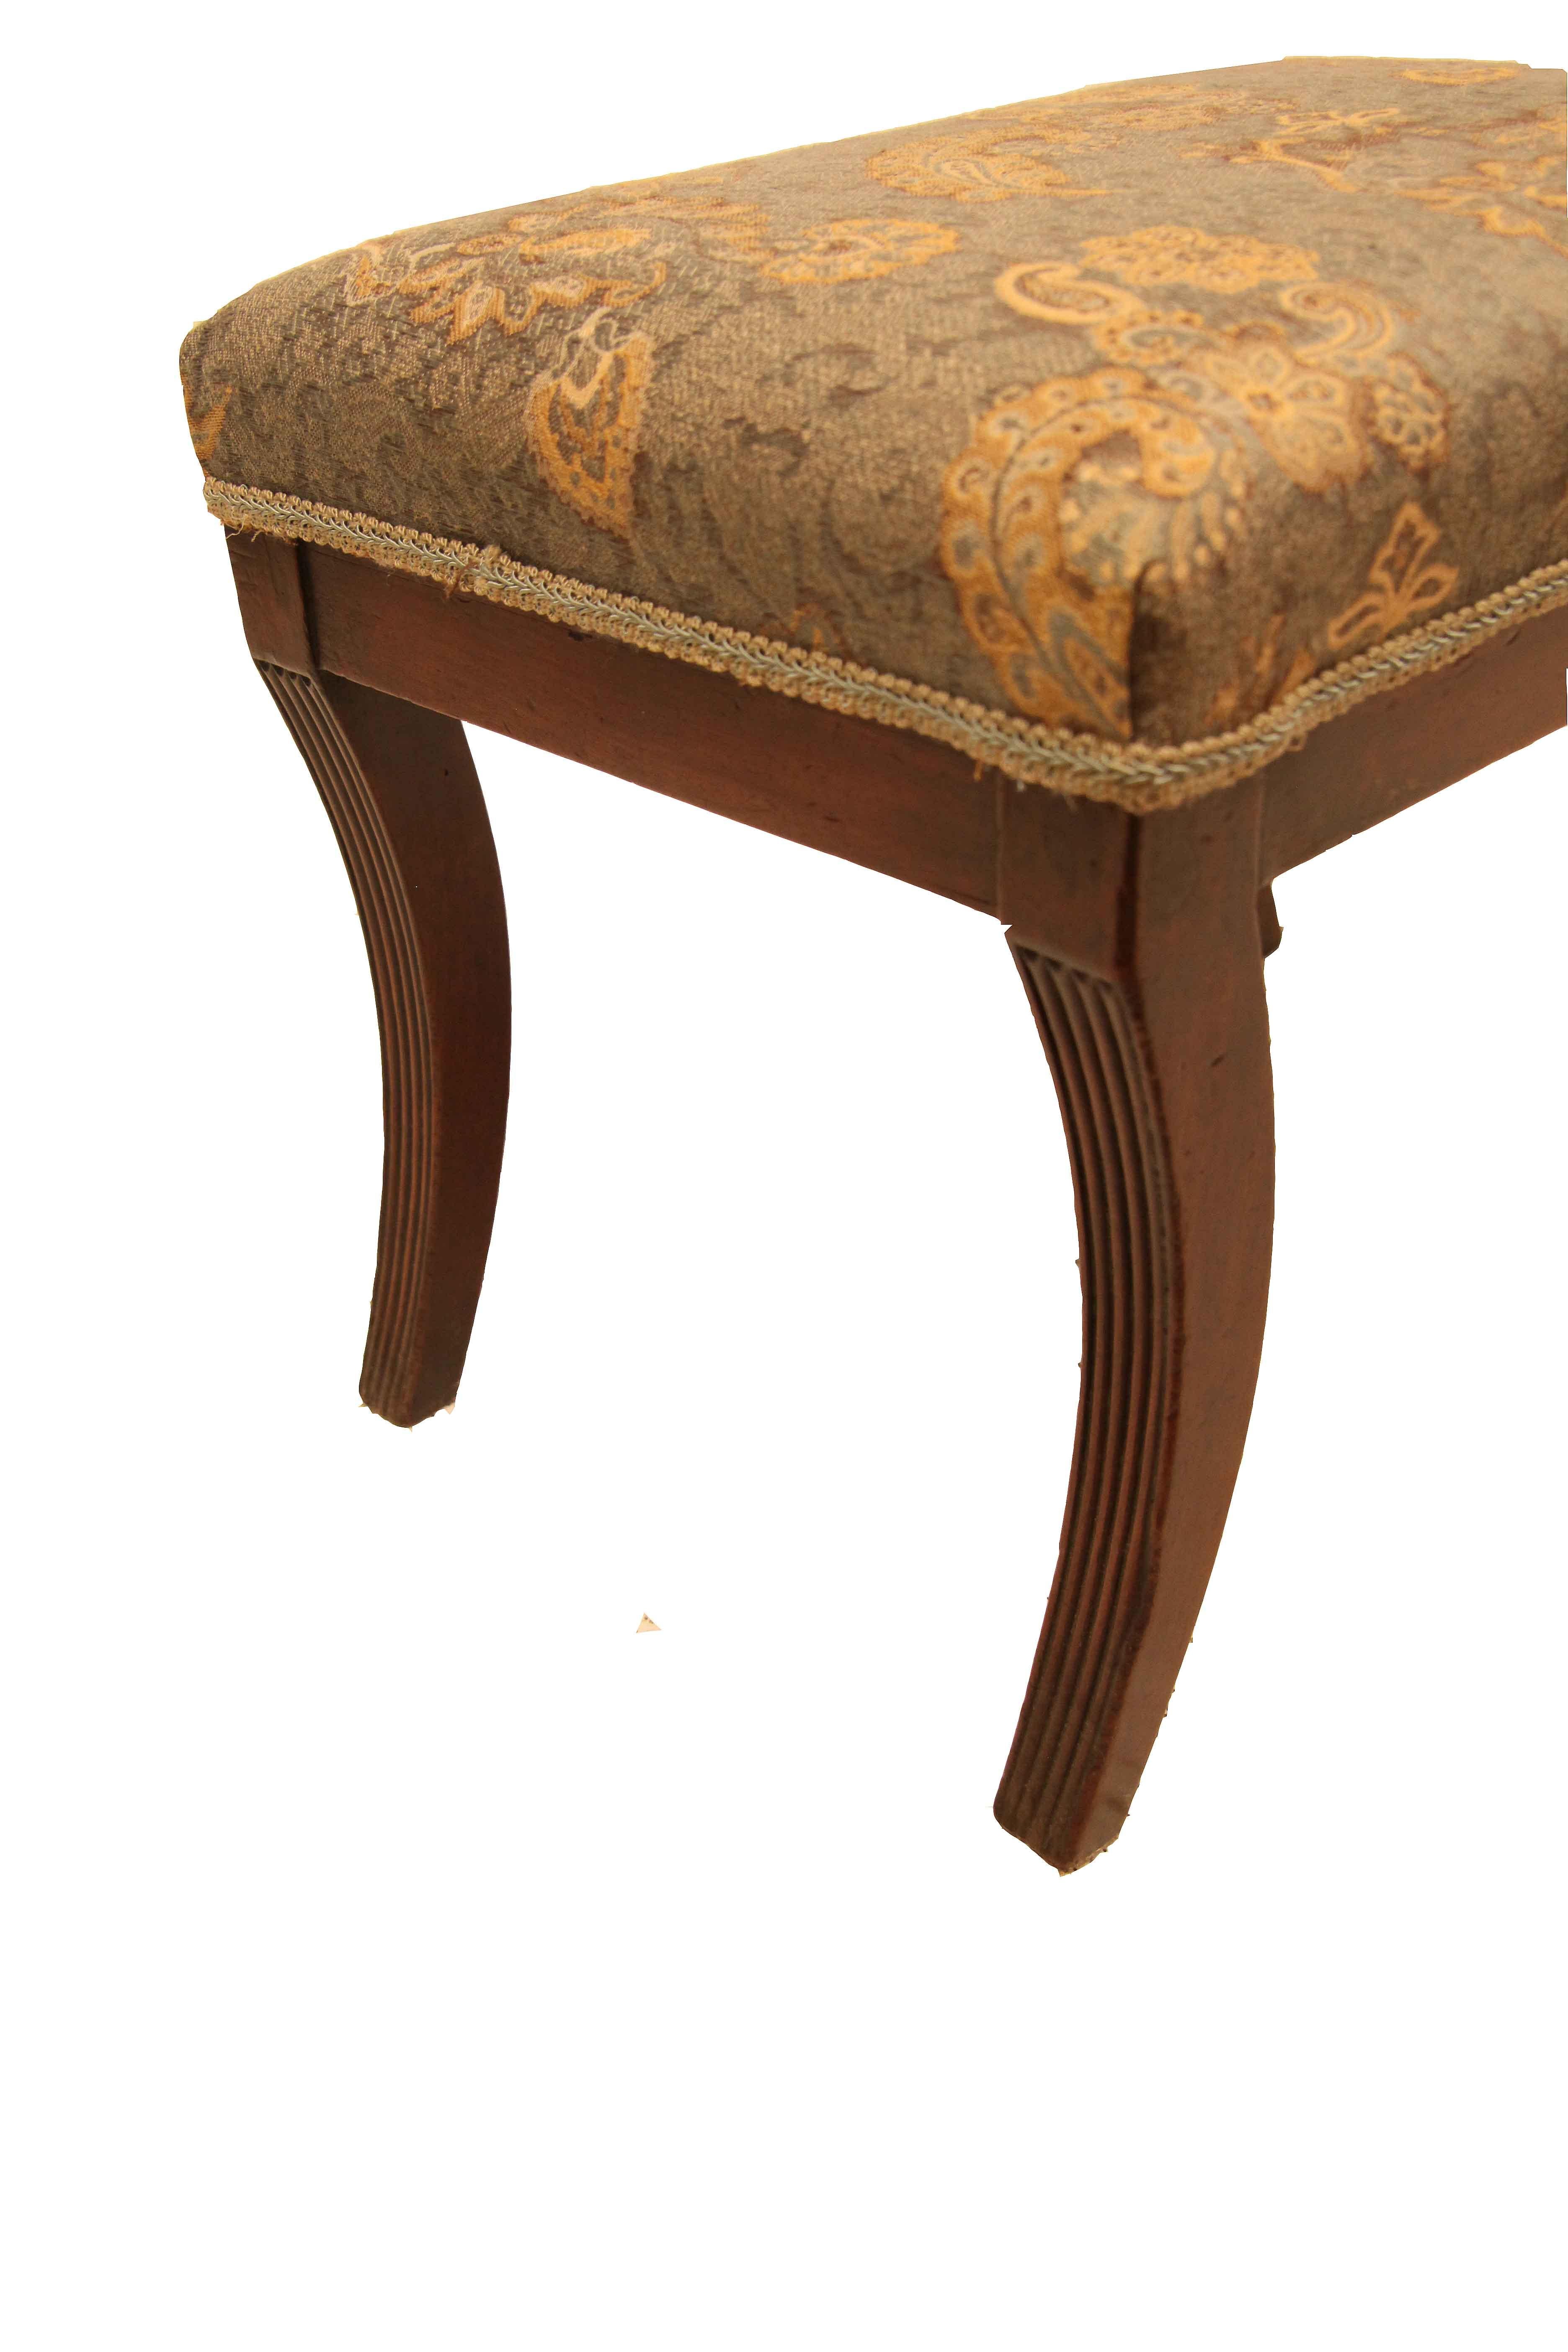 Regency foot stool, the legs with a beautiful sweeping concave shape have a reeded outer edge. The stool has been reupholstered in the latter part of the 20th century with a bold paisley pattern fabric. This stool is very sturdy .